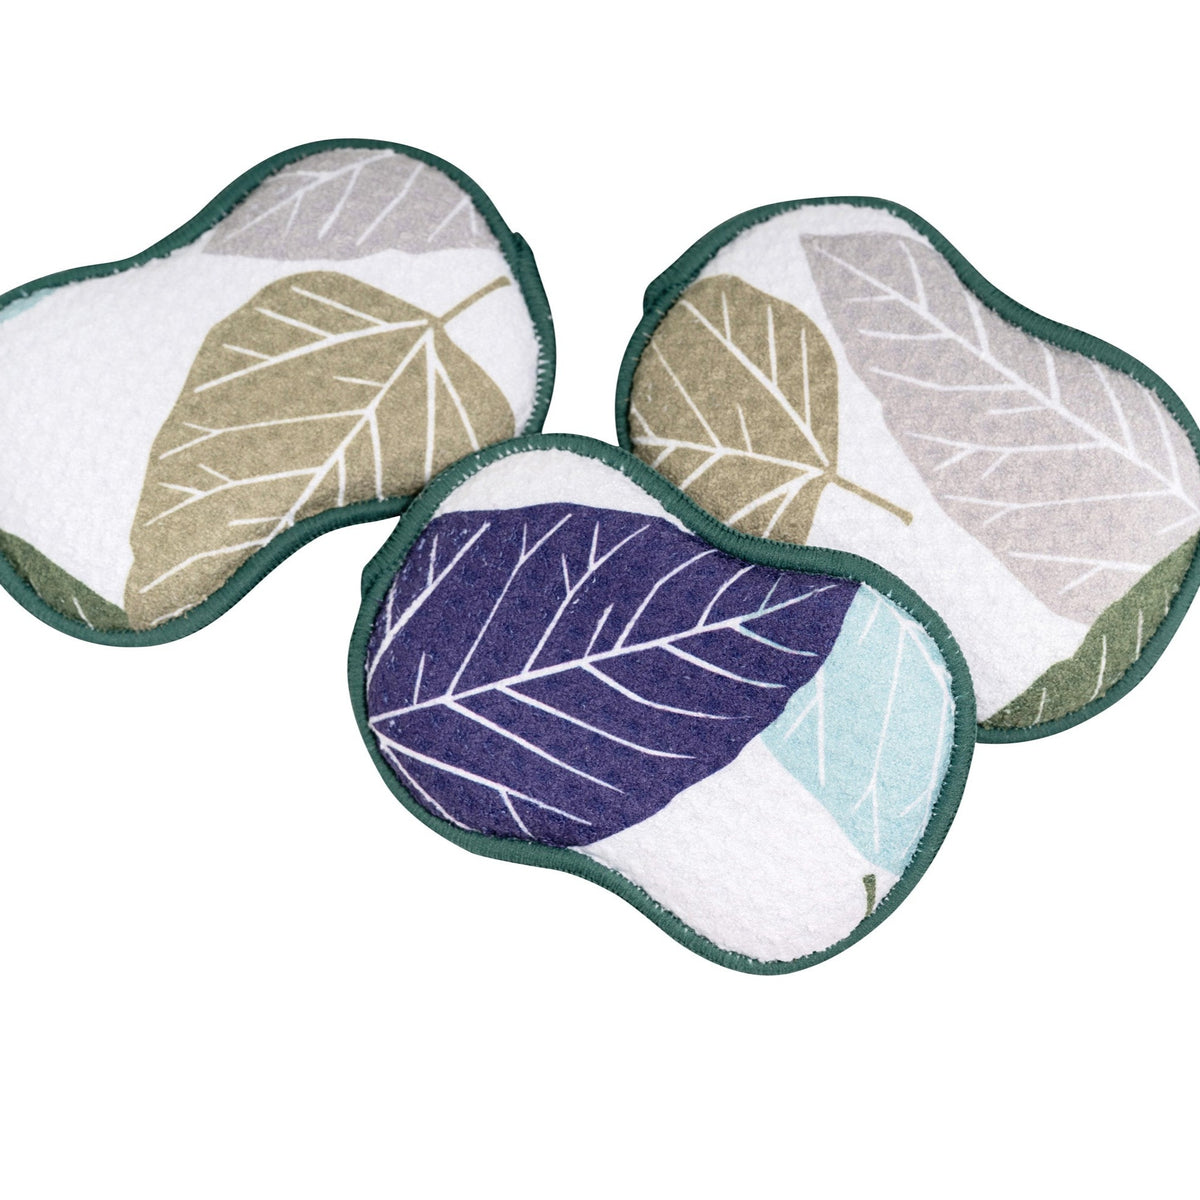 Assorted RE:usable Sponges (Set of 3) - Fall Bounty